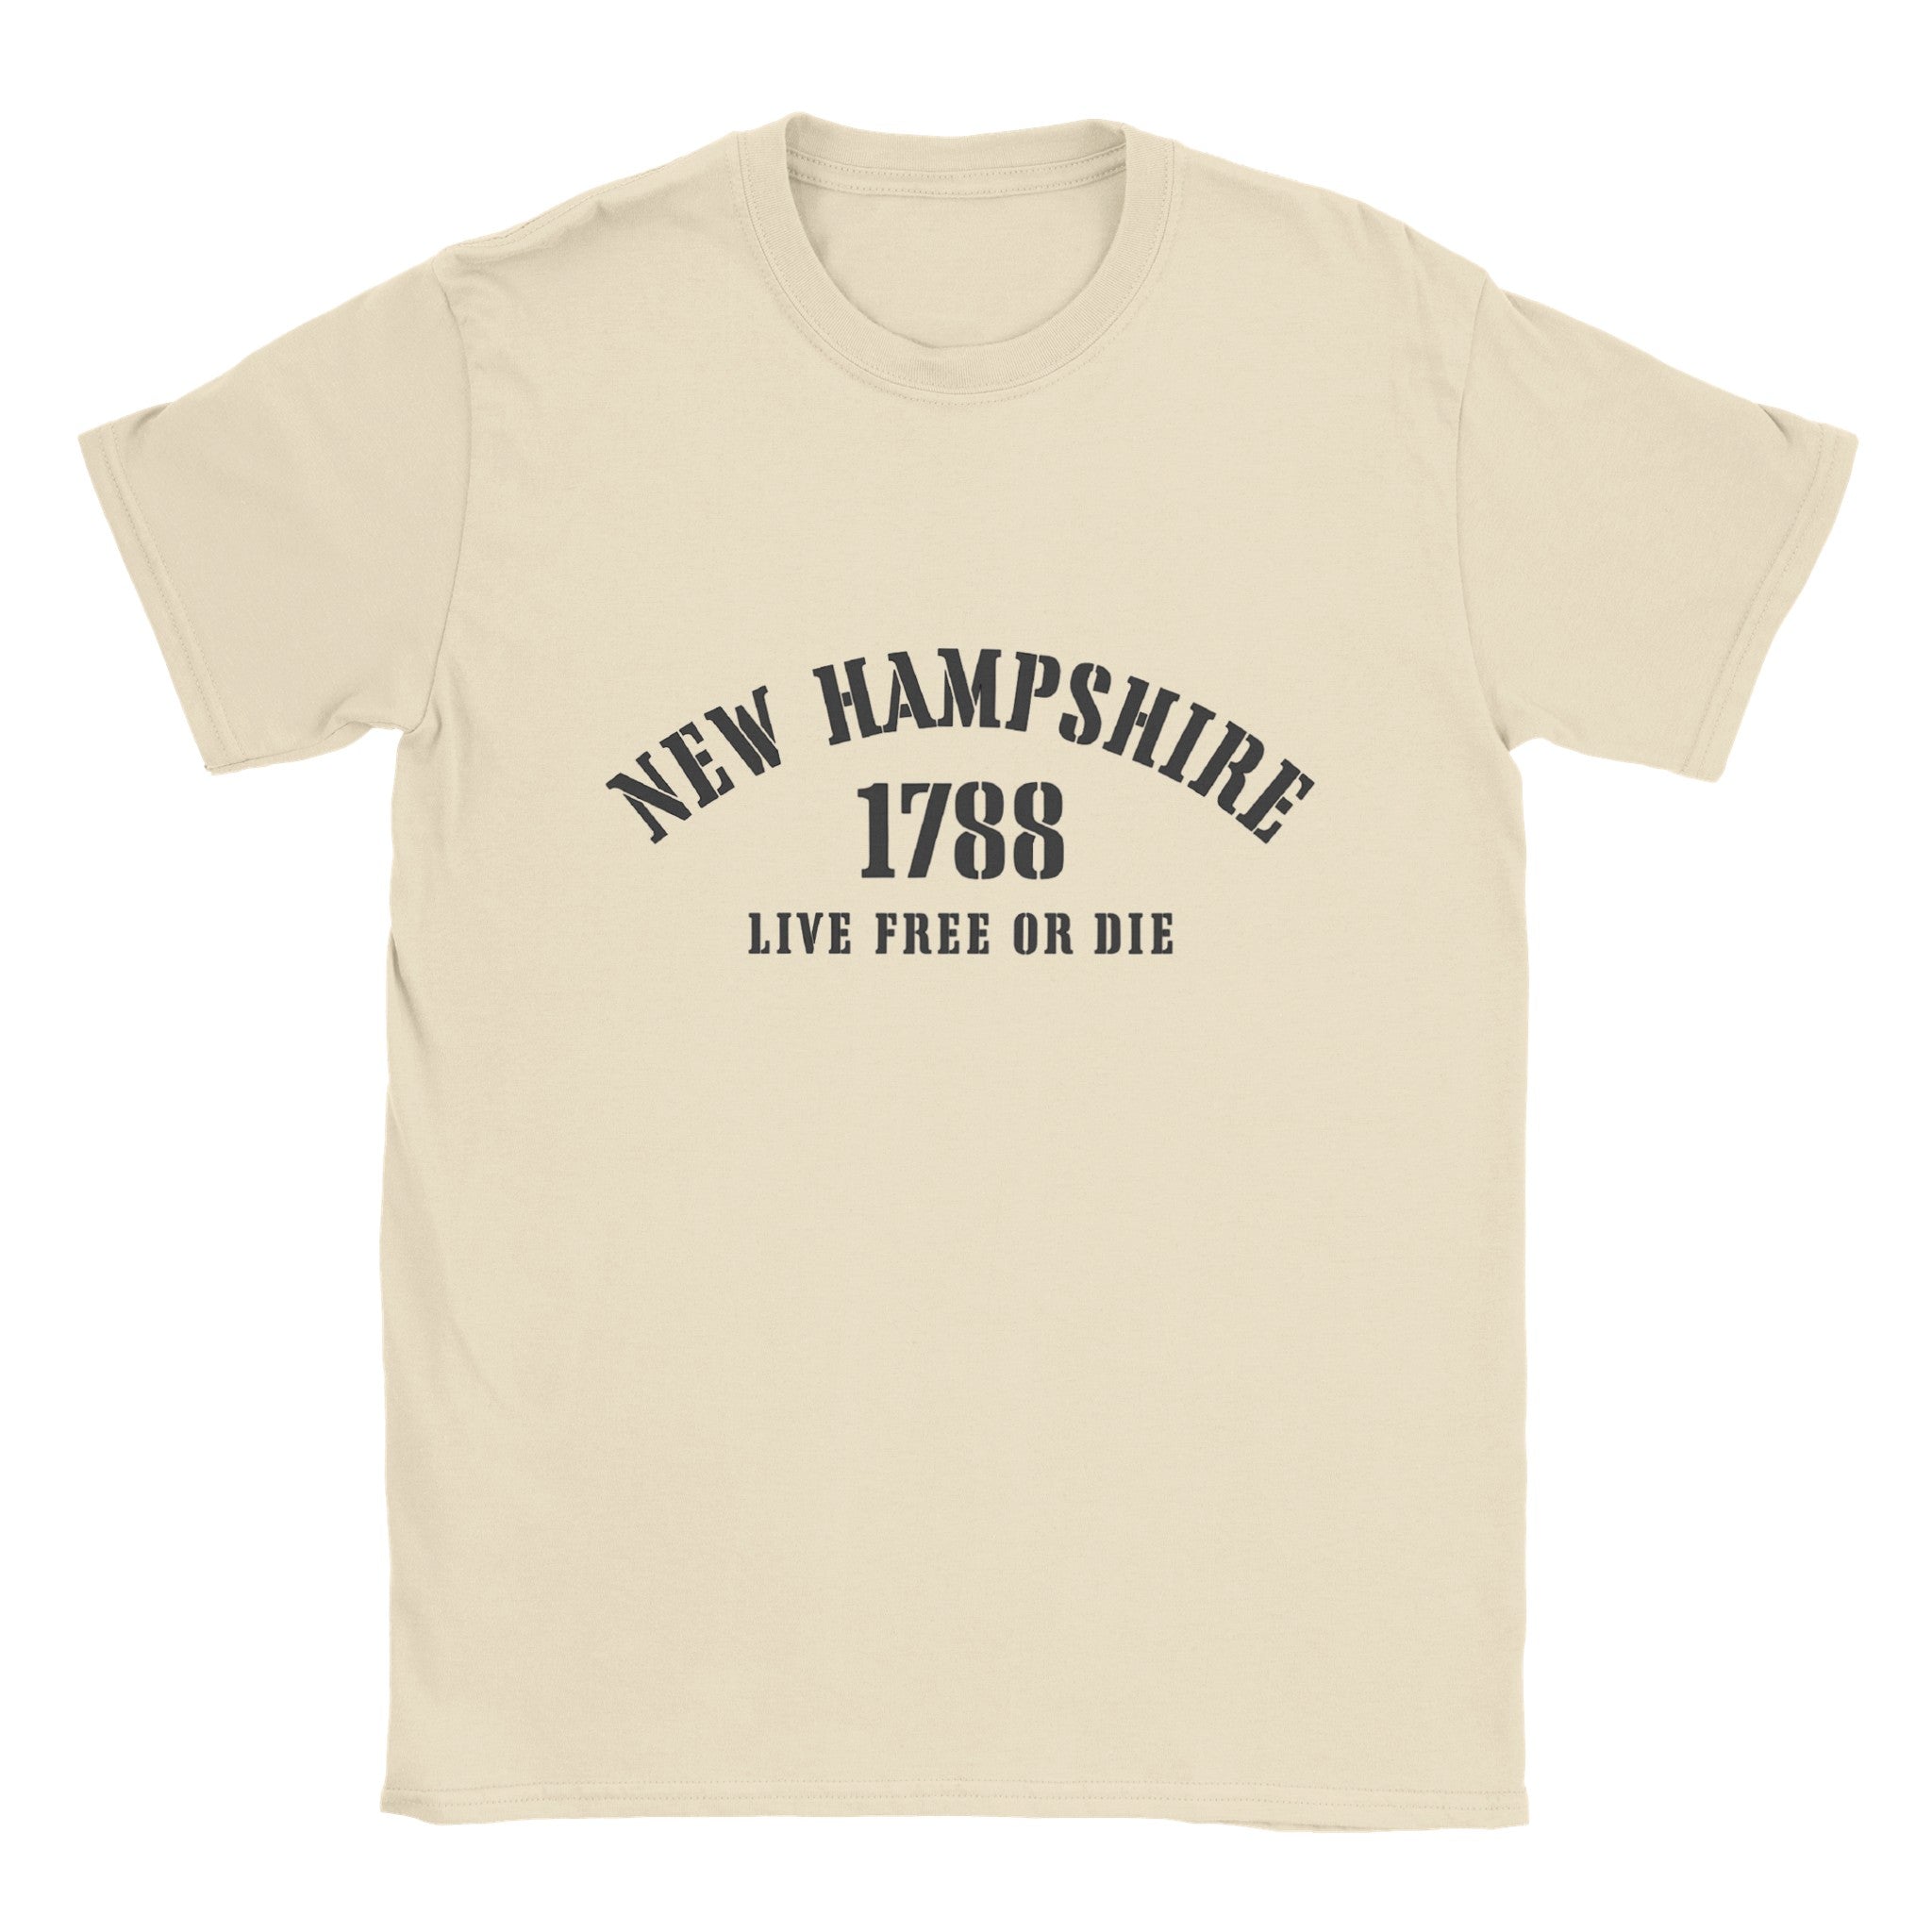 New Hampshire- Classic Unisex Crewneck States T-shirt - Creations by Chris and Carlos